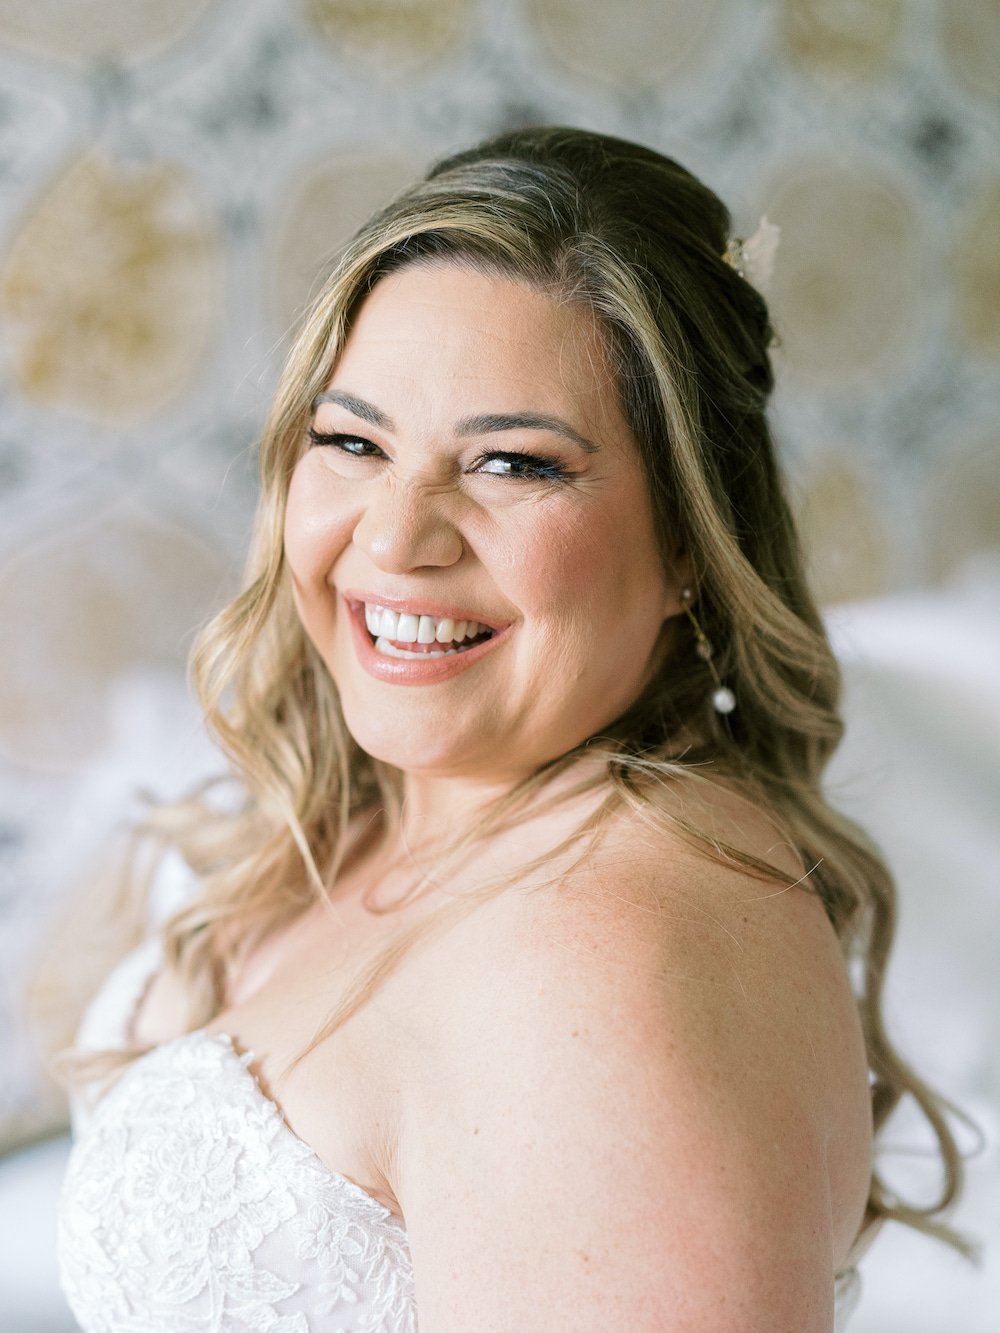 Glowing Los Angeles bride smiling after finalizing her wedding beauty routine.